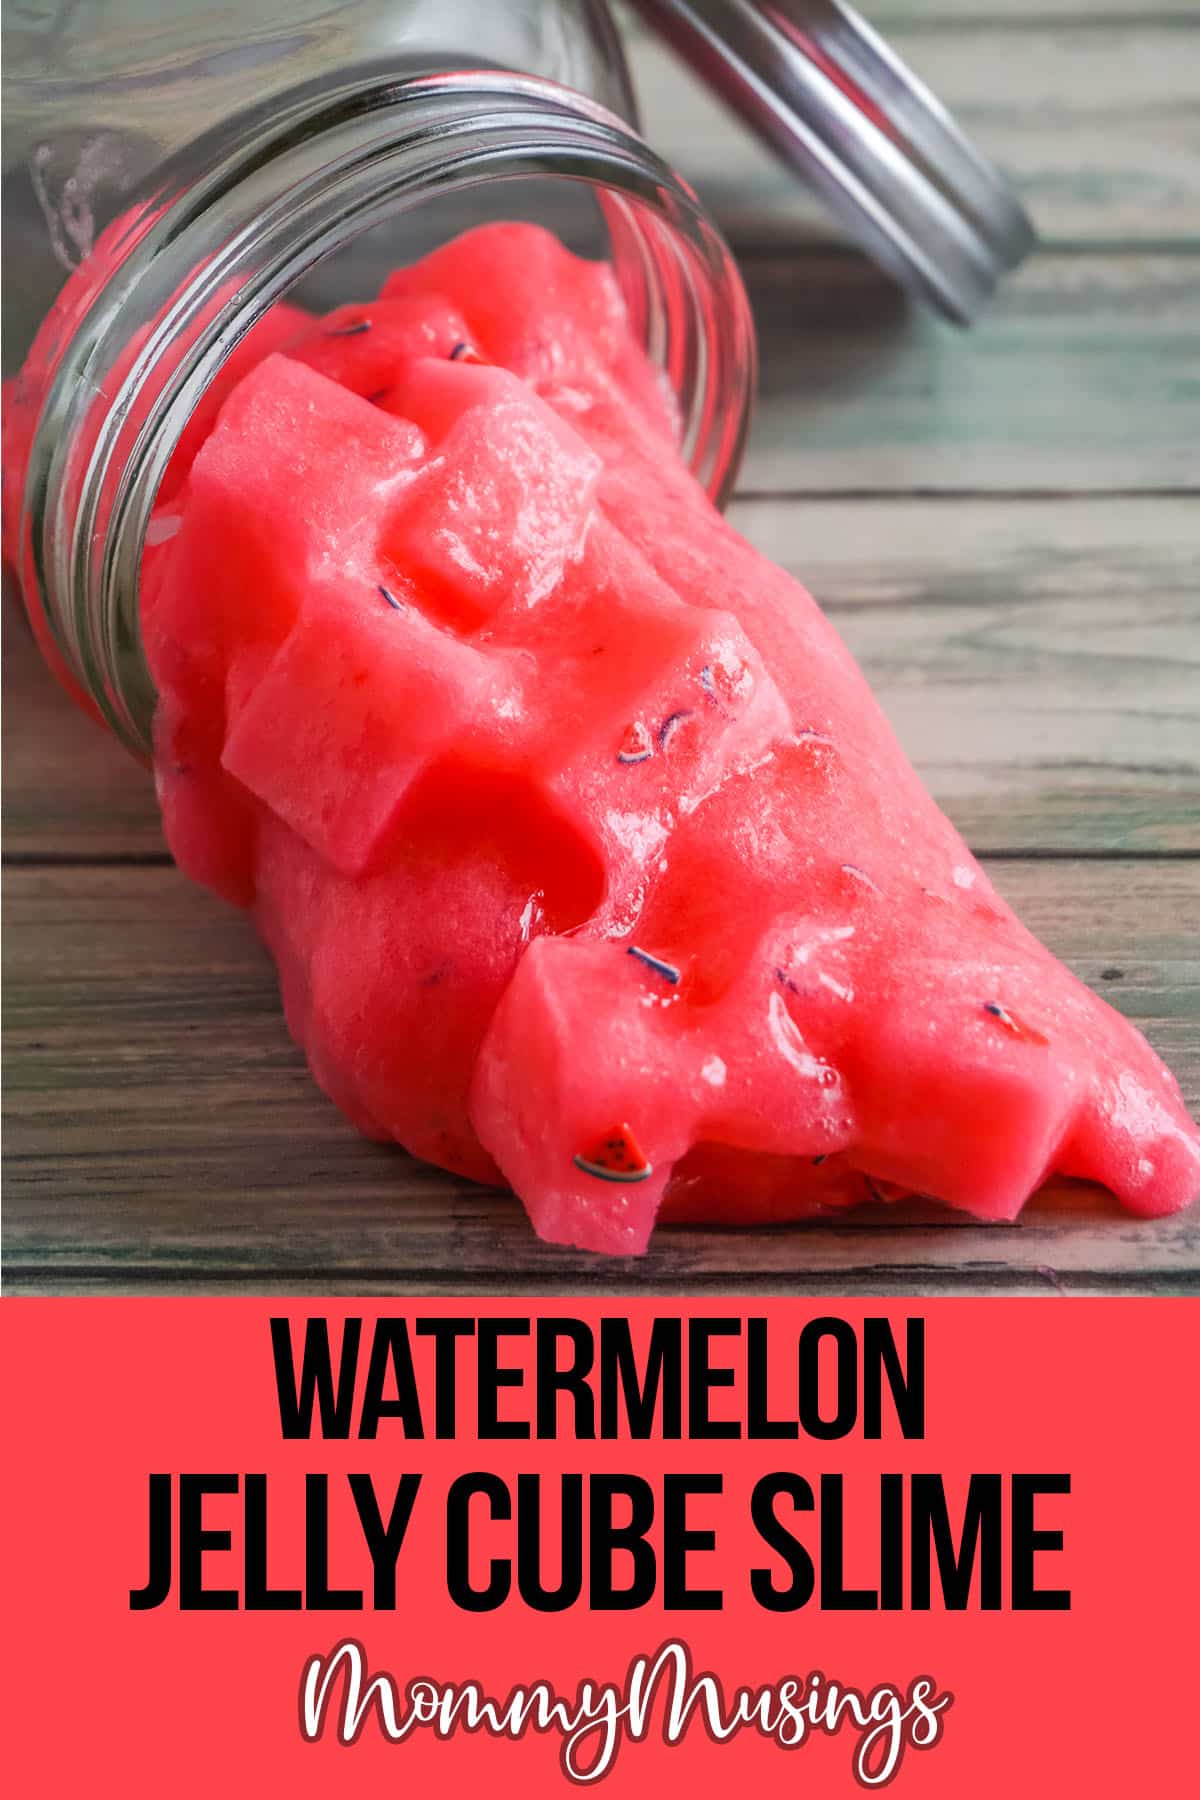 cup spilling out watermelon slime with text which reads watermelon jelly cube slime